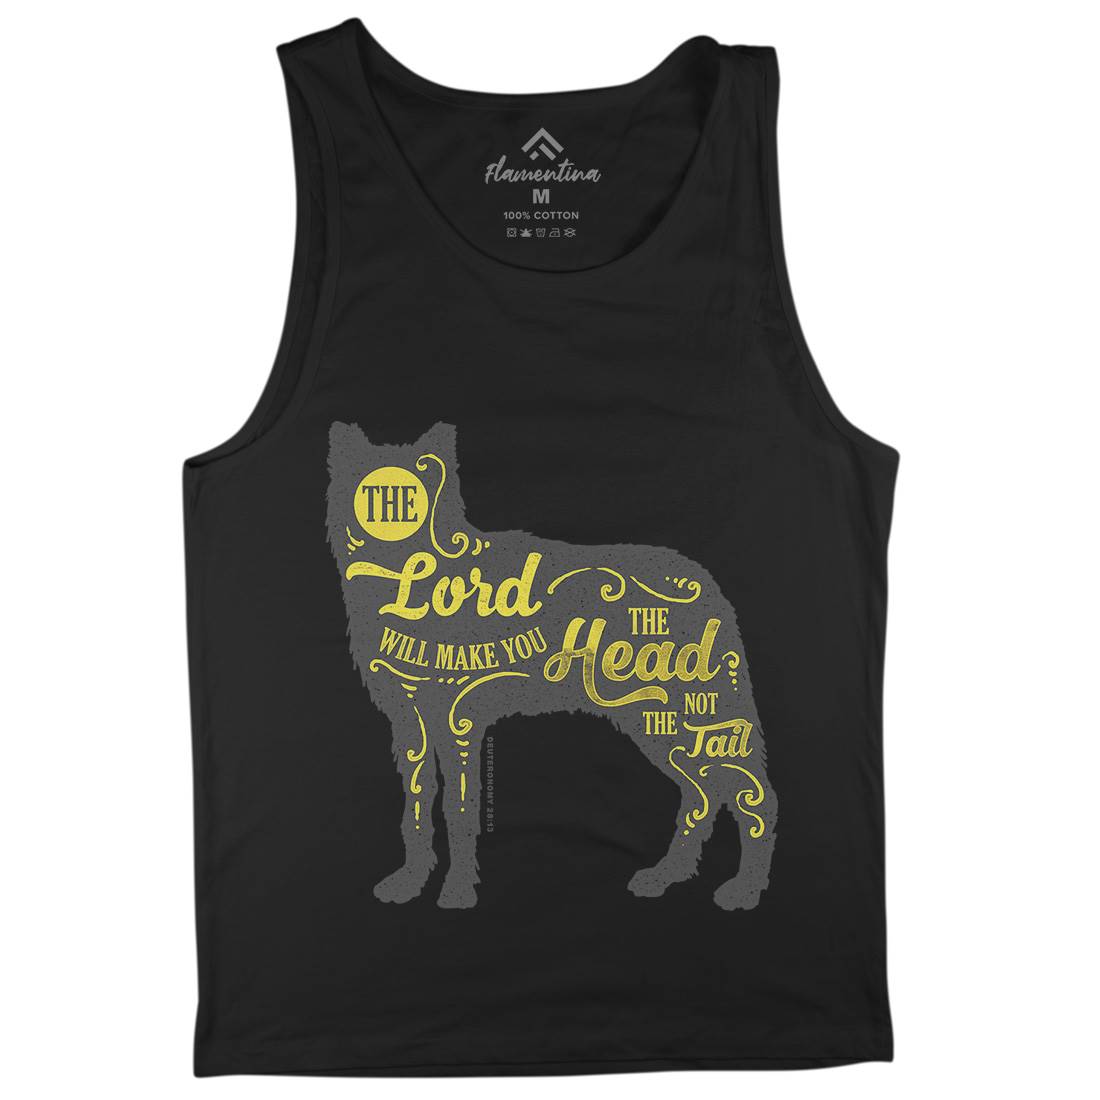 Head Not The Tail Mens Tank Top Vest Religion A326